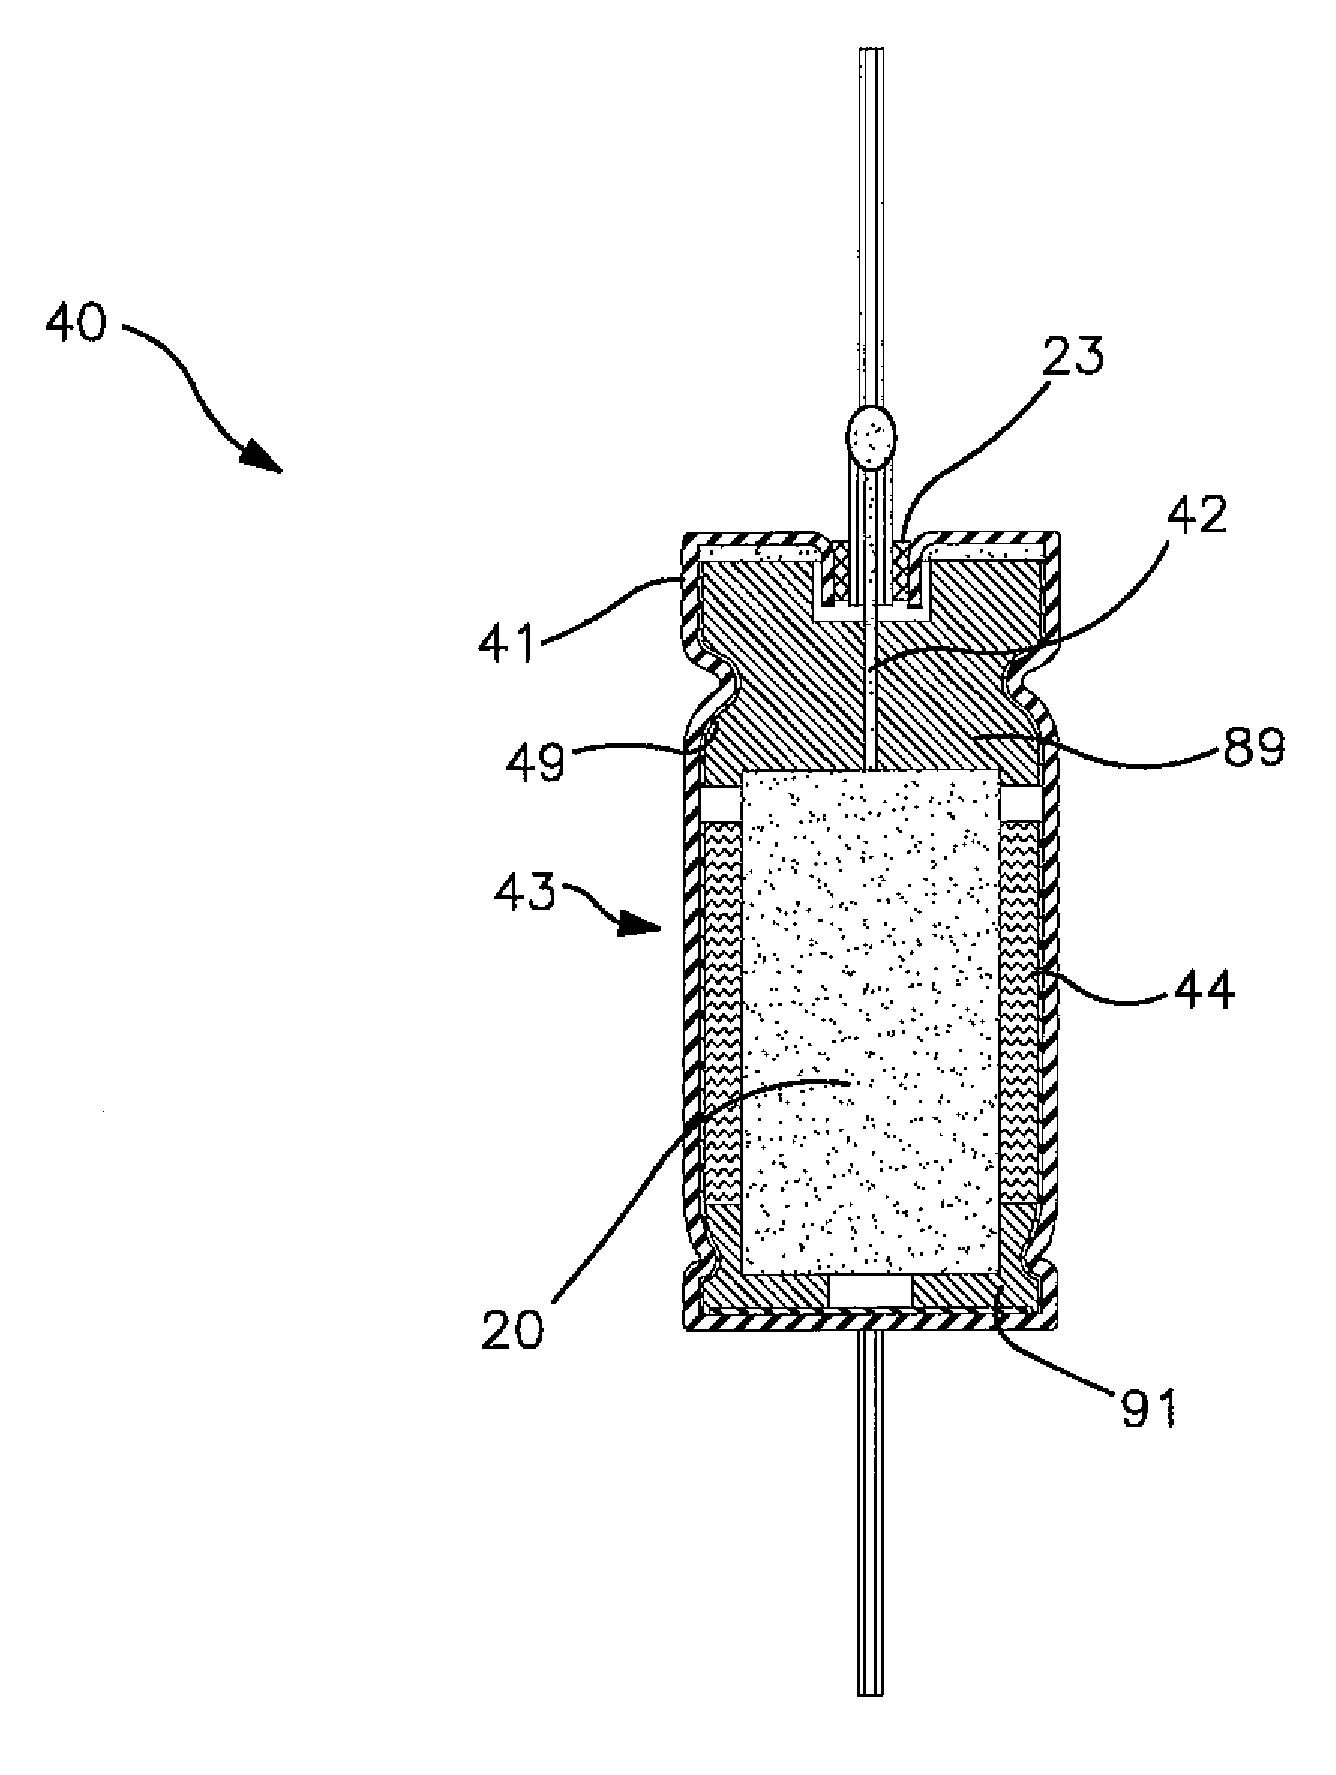 Conductive Polymer Coating for Wet Electrolytic Capacitor